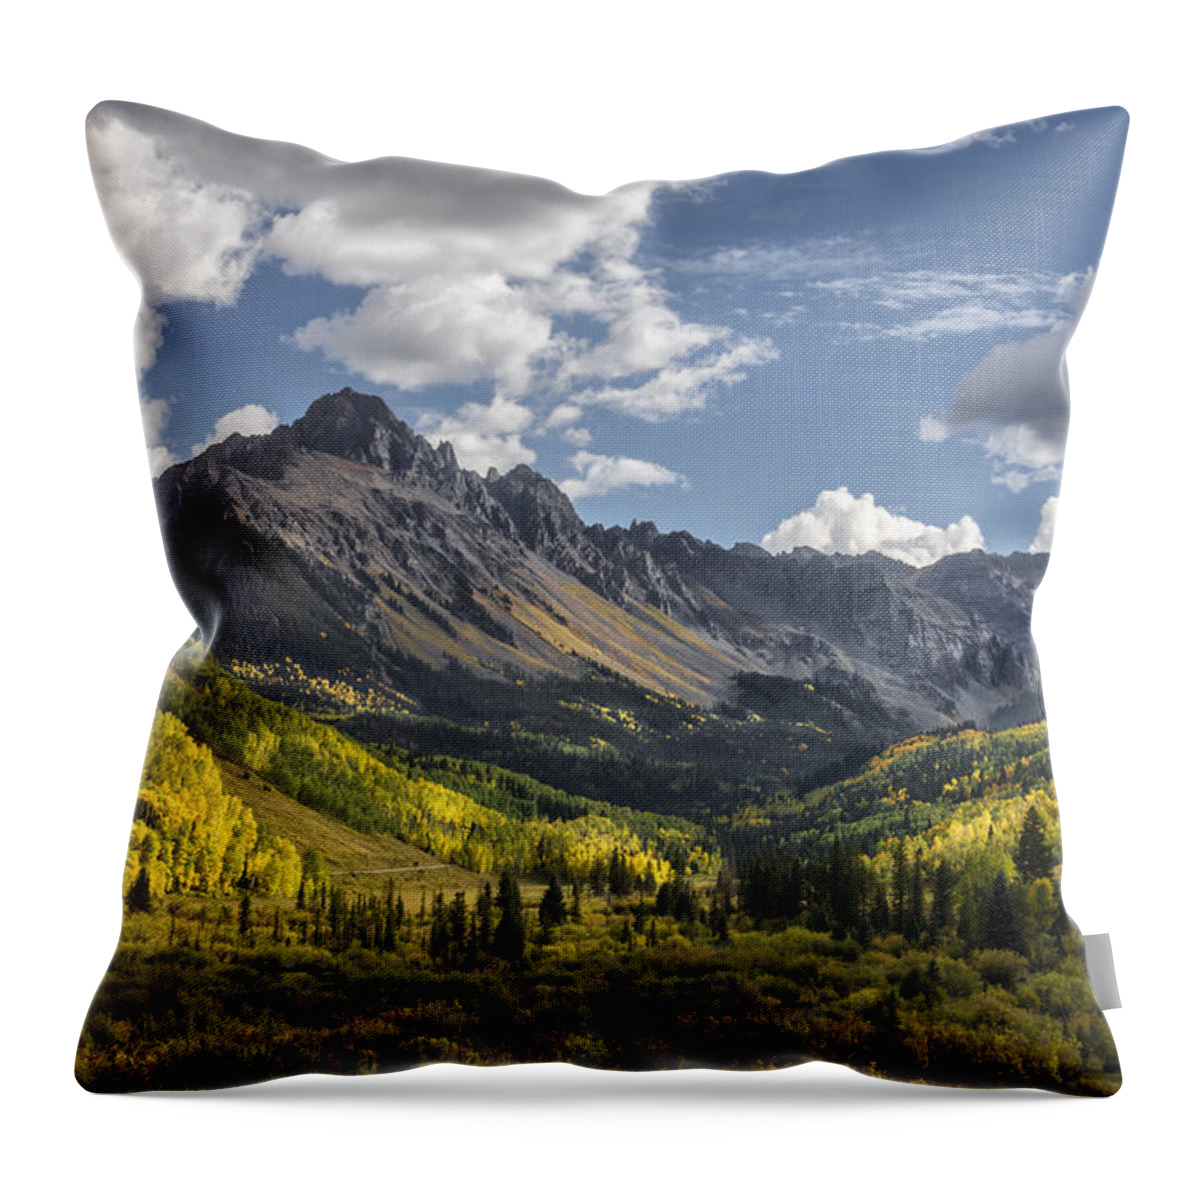 Art Throw Pillow featuring the photograph We Go Walking by Jon Glaser